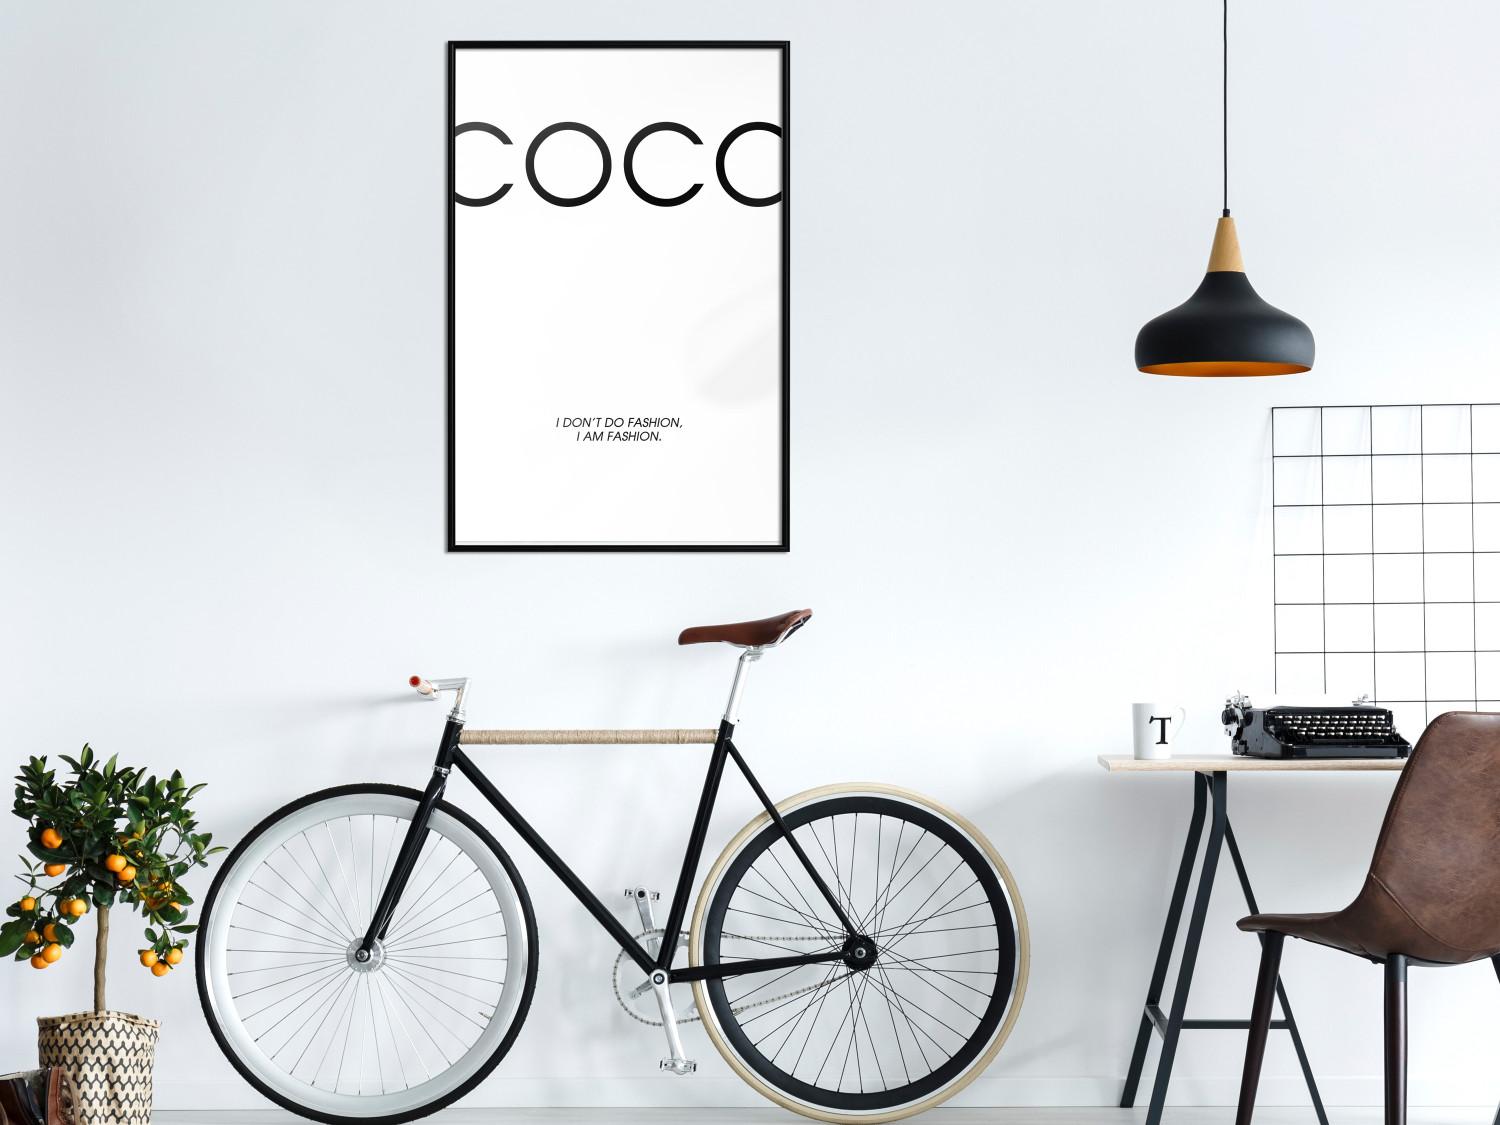 Gallery wall Coco - minimalist black and white composition with English texts